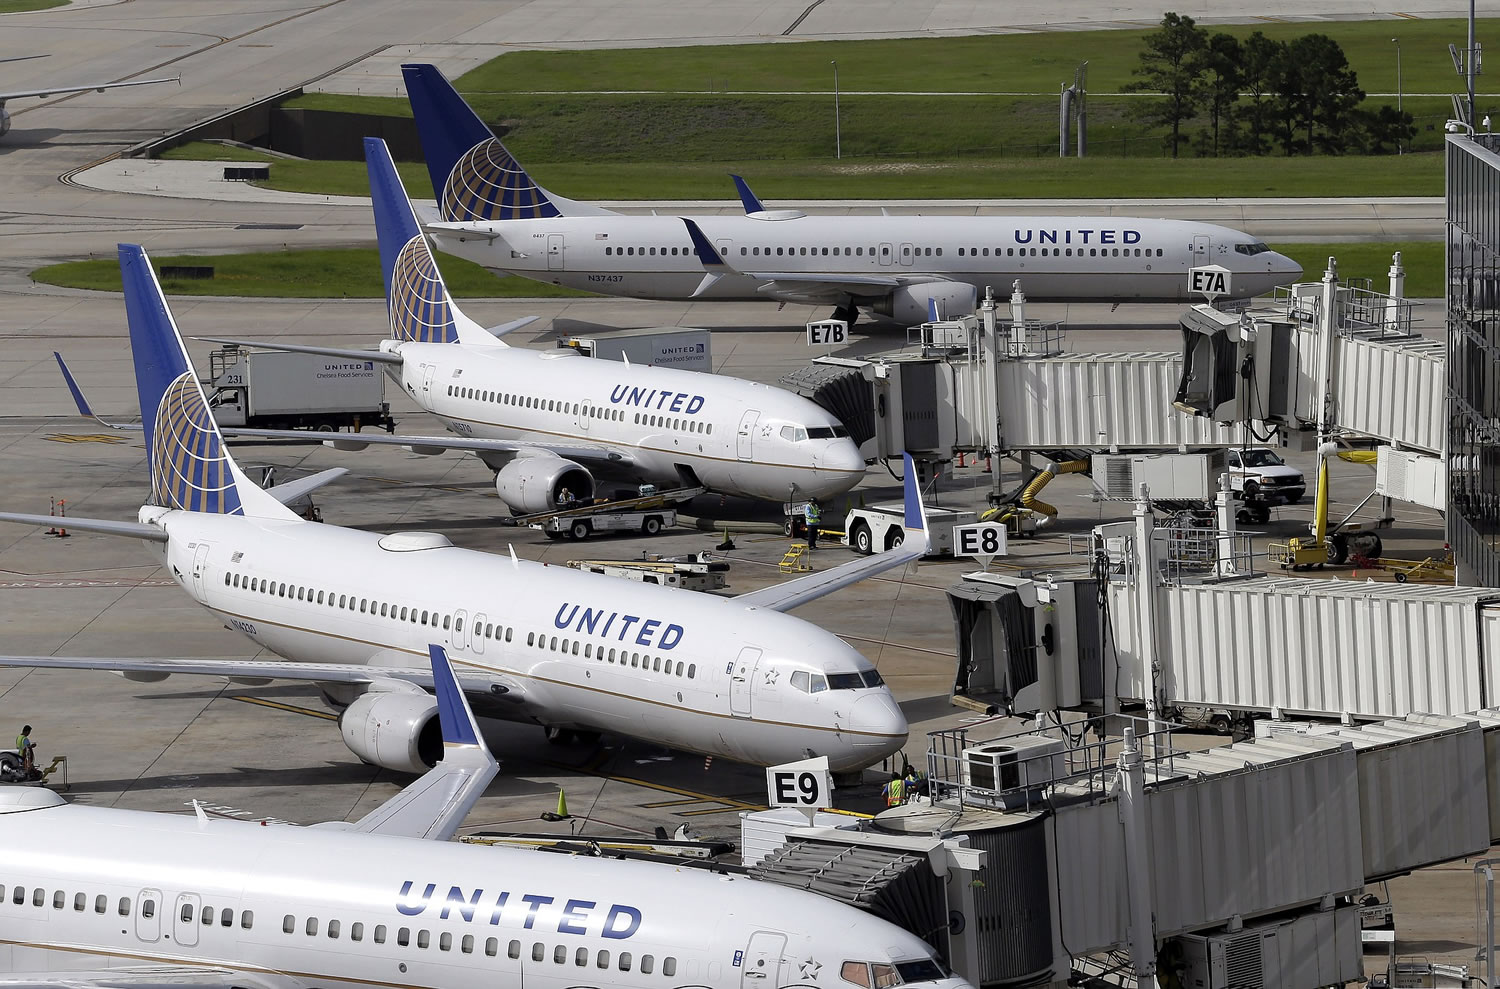 United Airlines planes are parked at their gates as another plane, top, taxis past them at George Bush Intercontinental Airport on Wednesday in Houston. All United Continental flights in the U.S. were grounded temporarily Wednesday due to computer problems. Less than two hours later, United requested the Federal Aviation Administration lift the ground stop order.